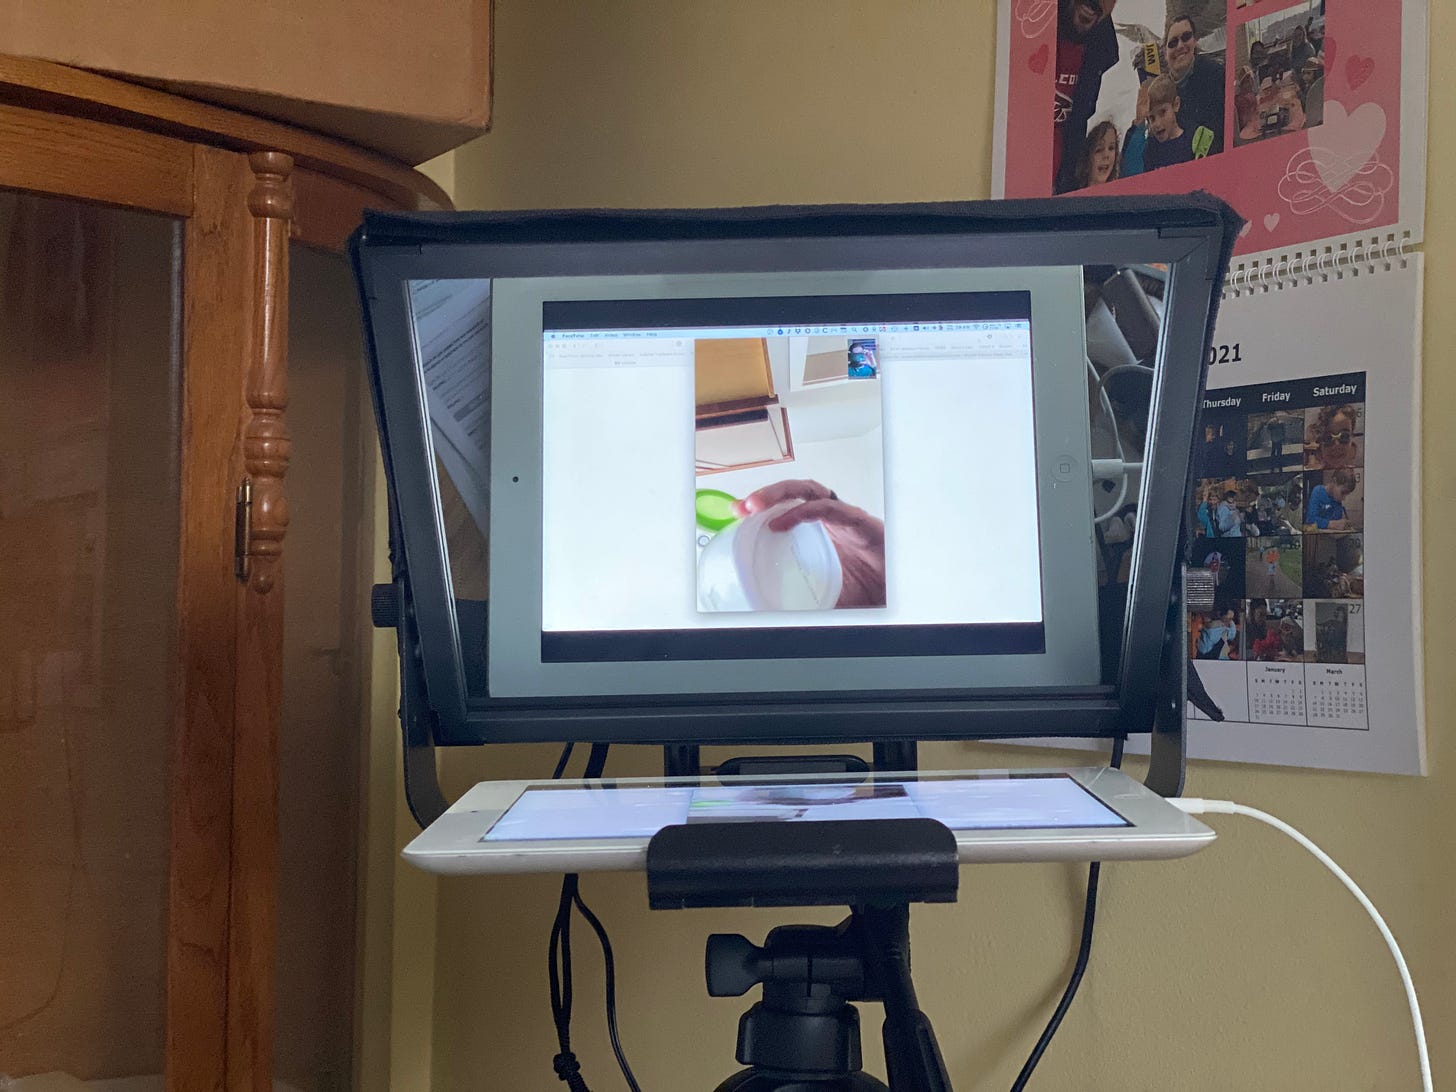 An iPad mounted in the teleprompter frame